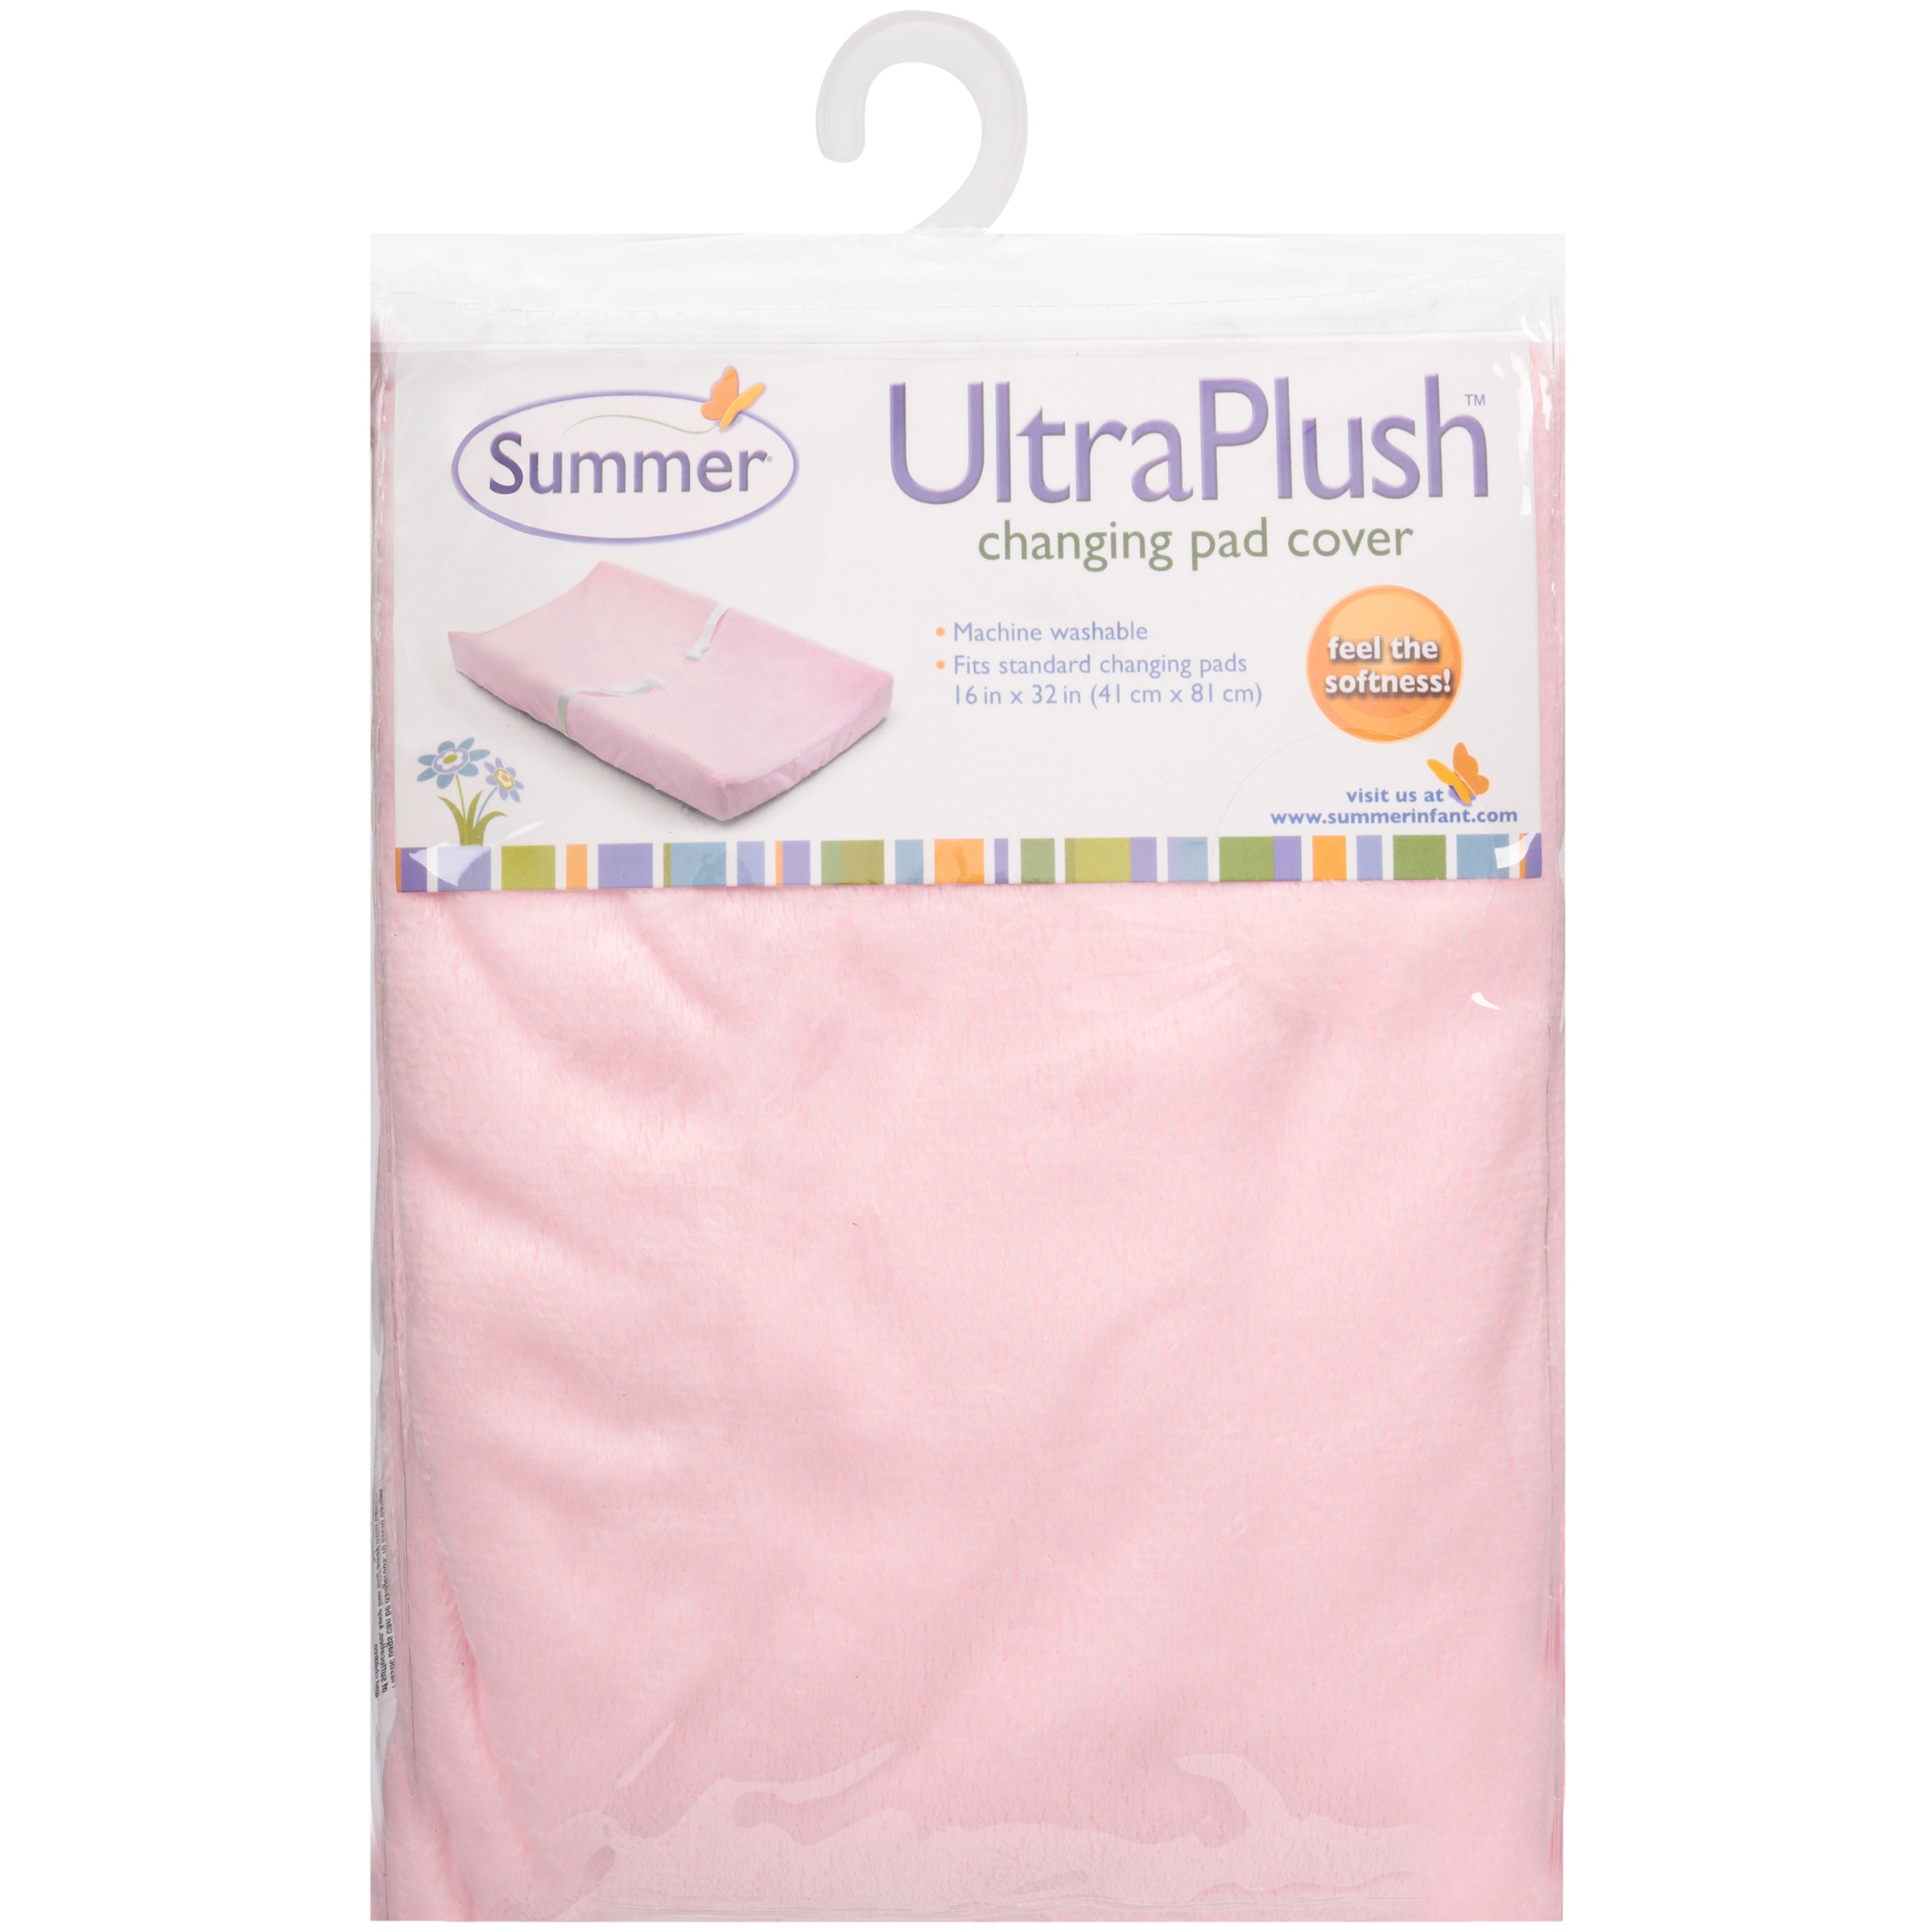 Summer Ultra Plush Changing Pad Cover, Pink - image 3 of 3